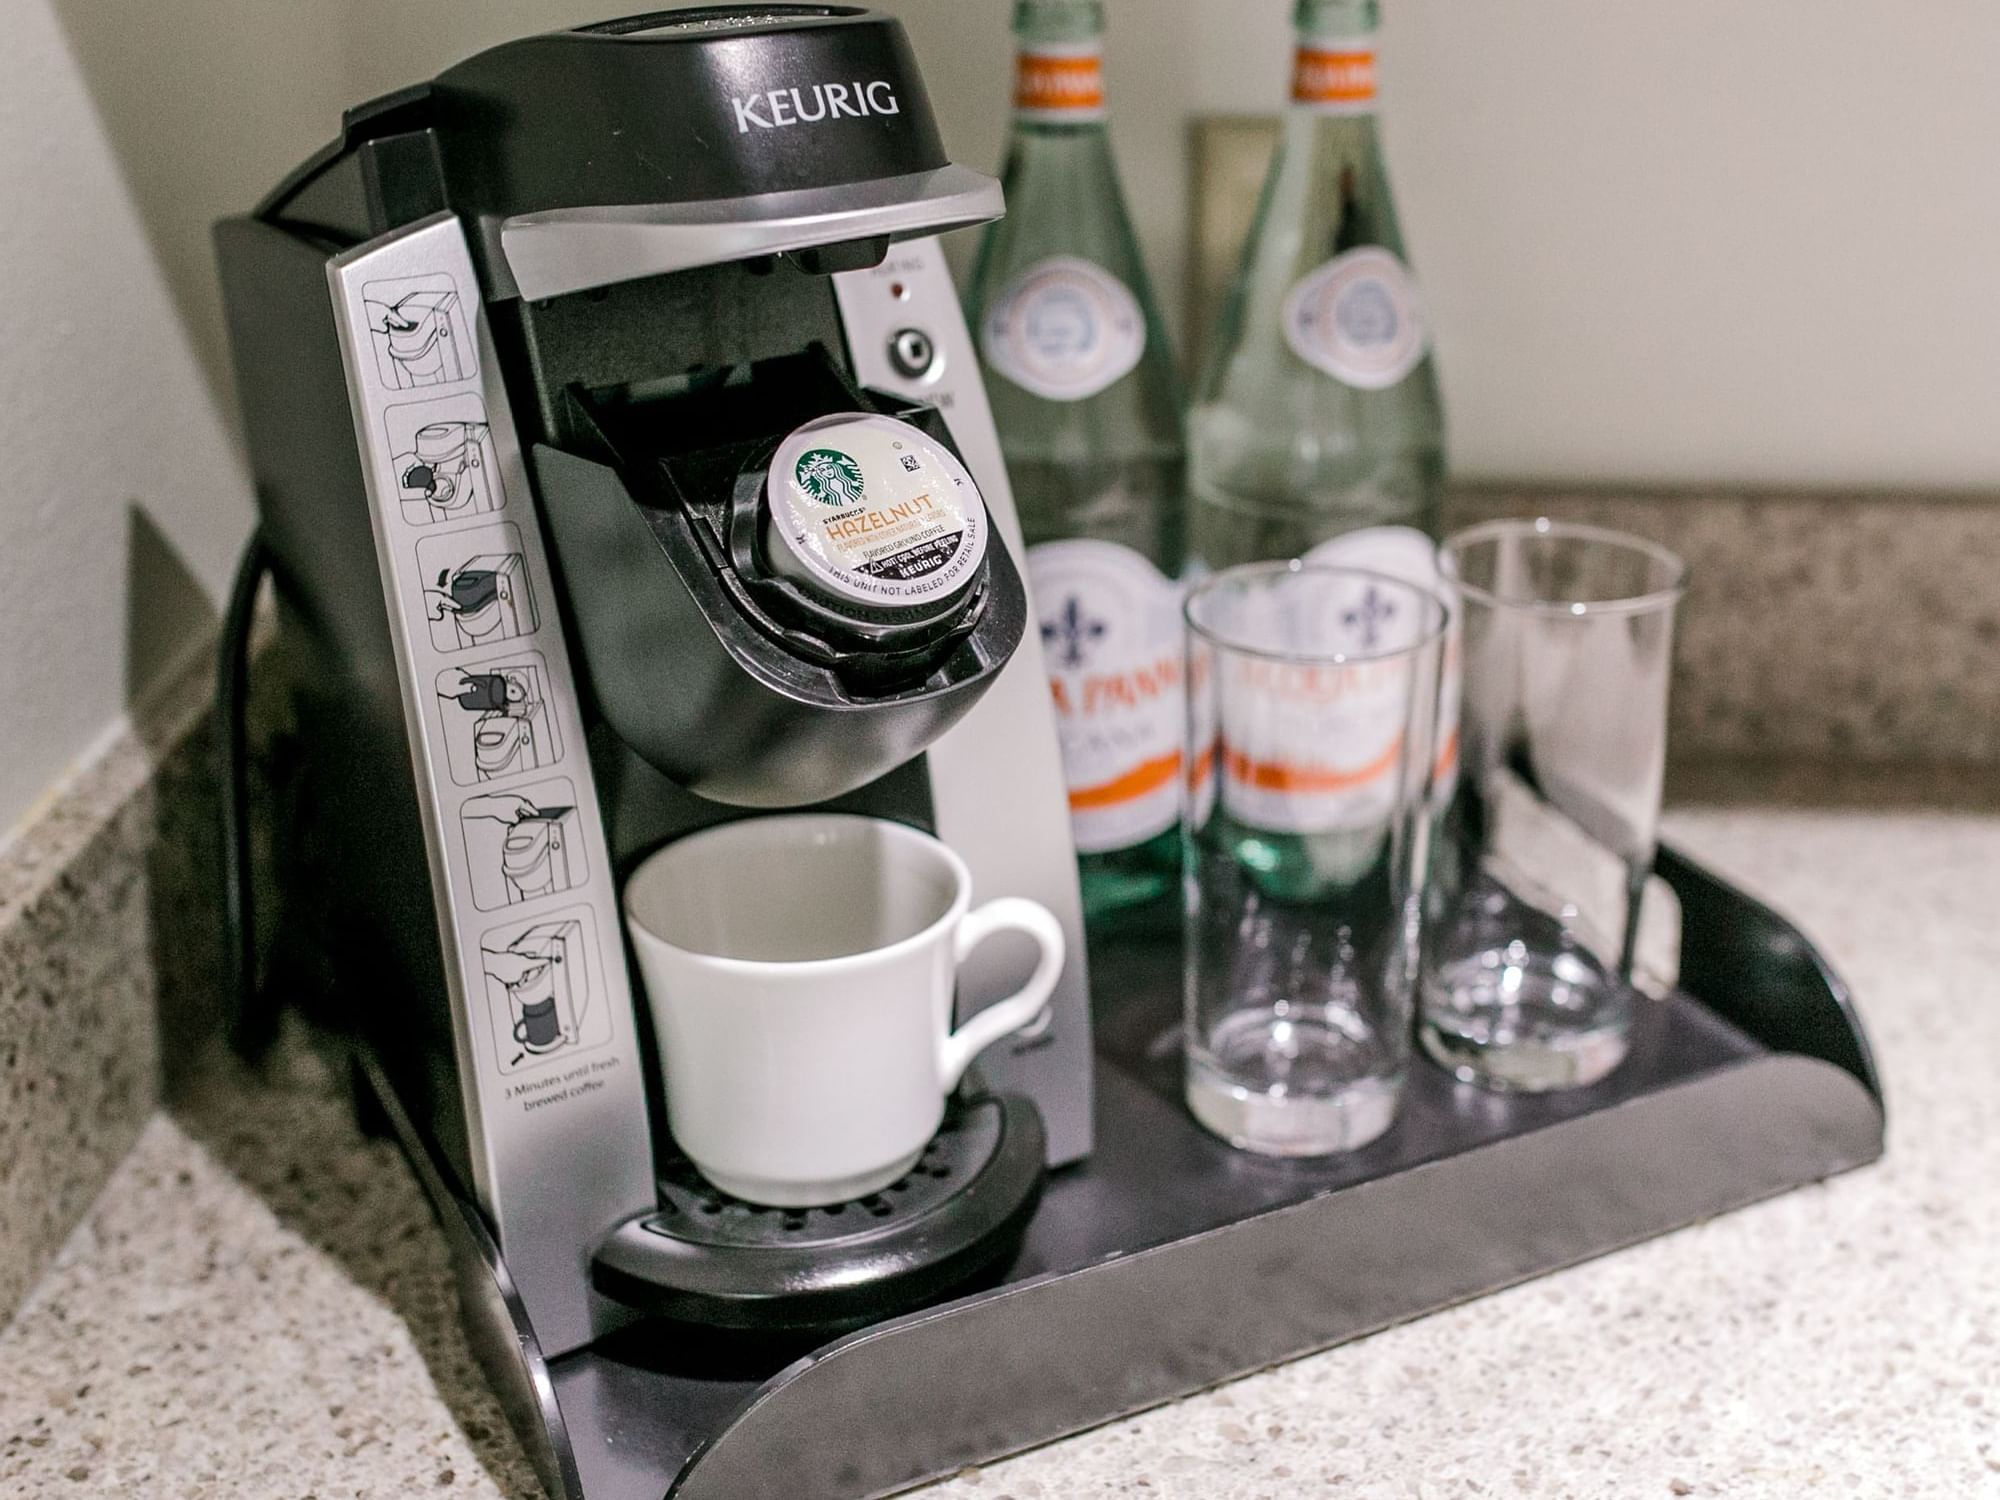 Keurig Coffe System with kcup, coffee mug, and water